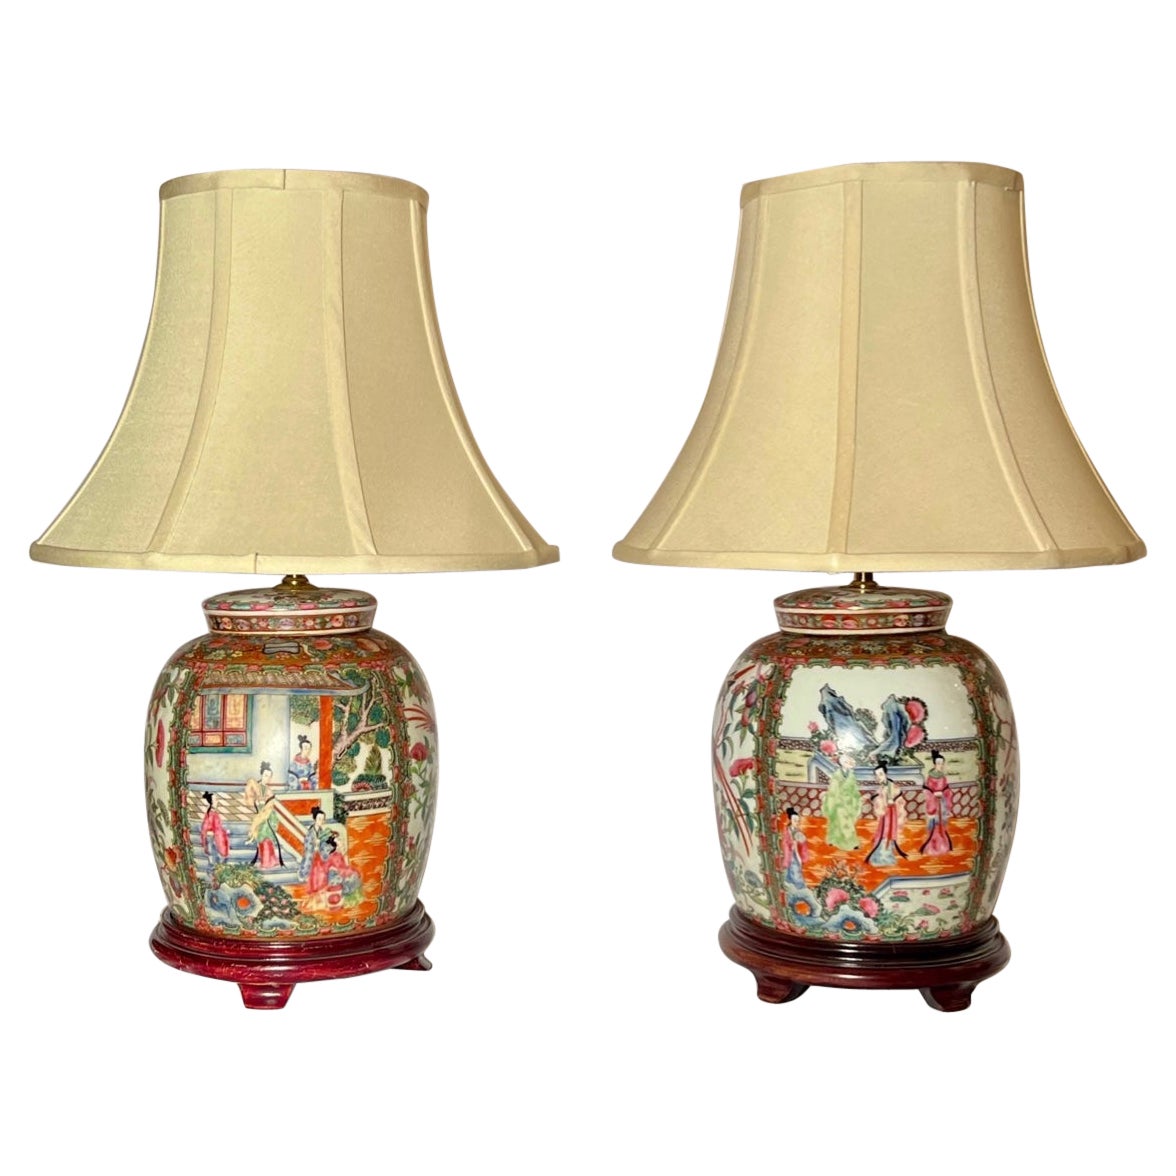 Pair Rose Medallion Chinese lamps c 1940-50